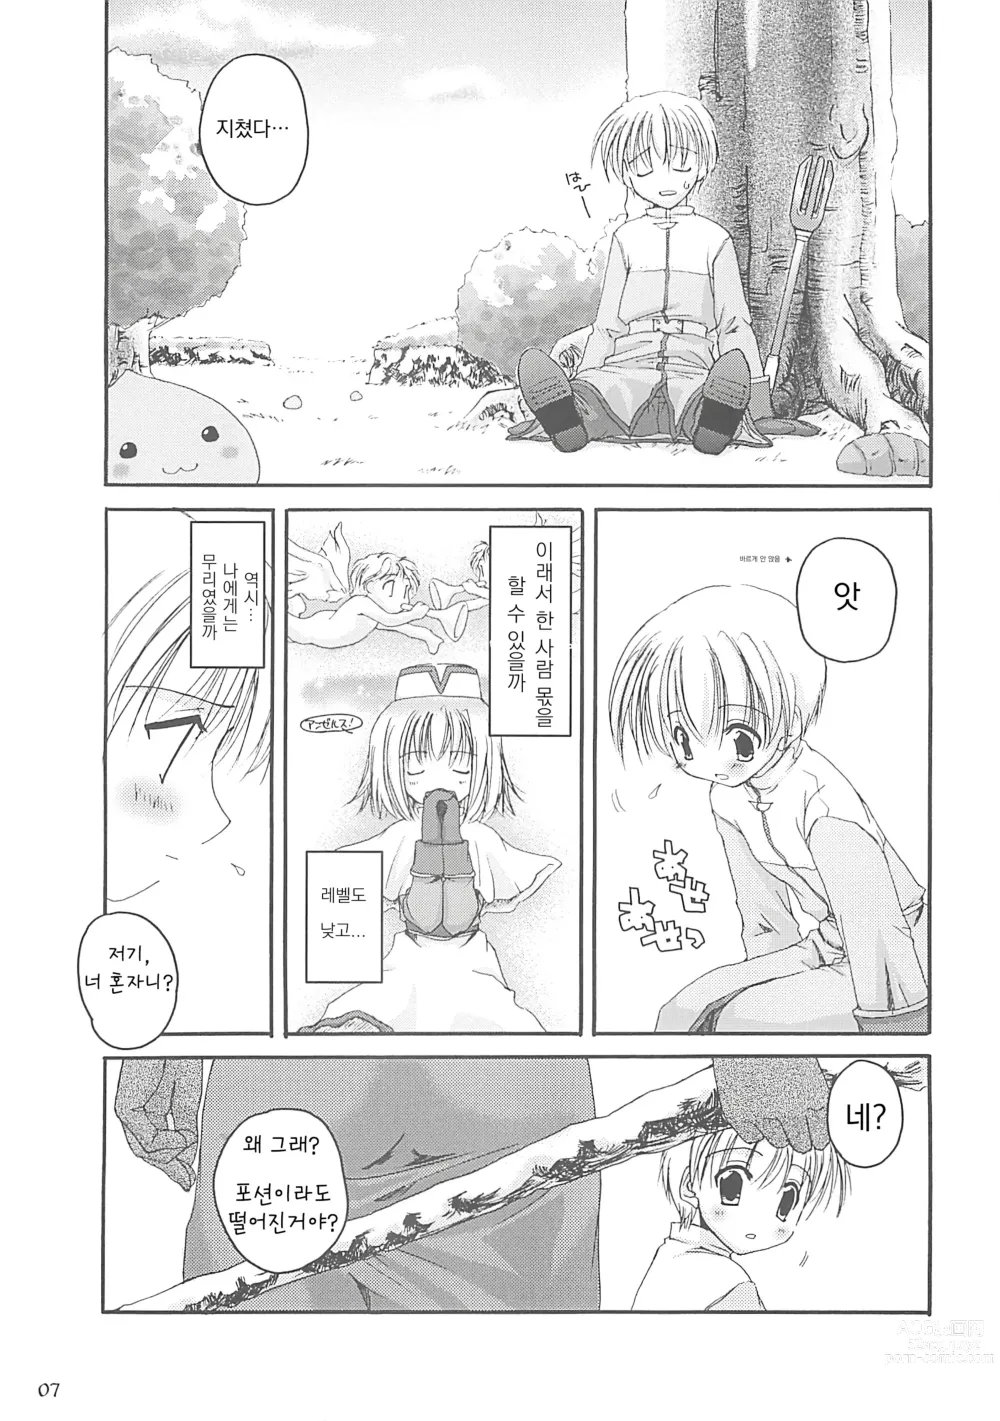 Page 6 of doujinshi D.L. Action 13